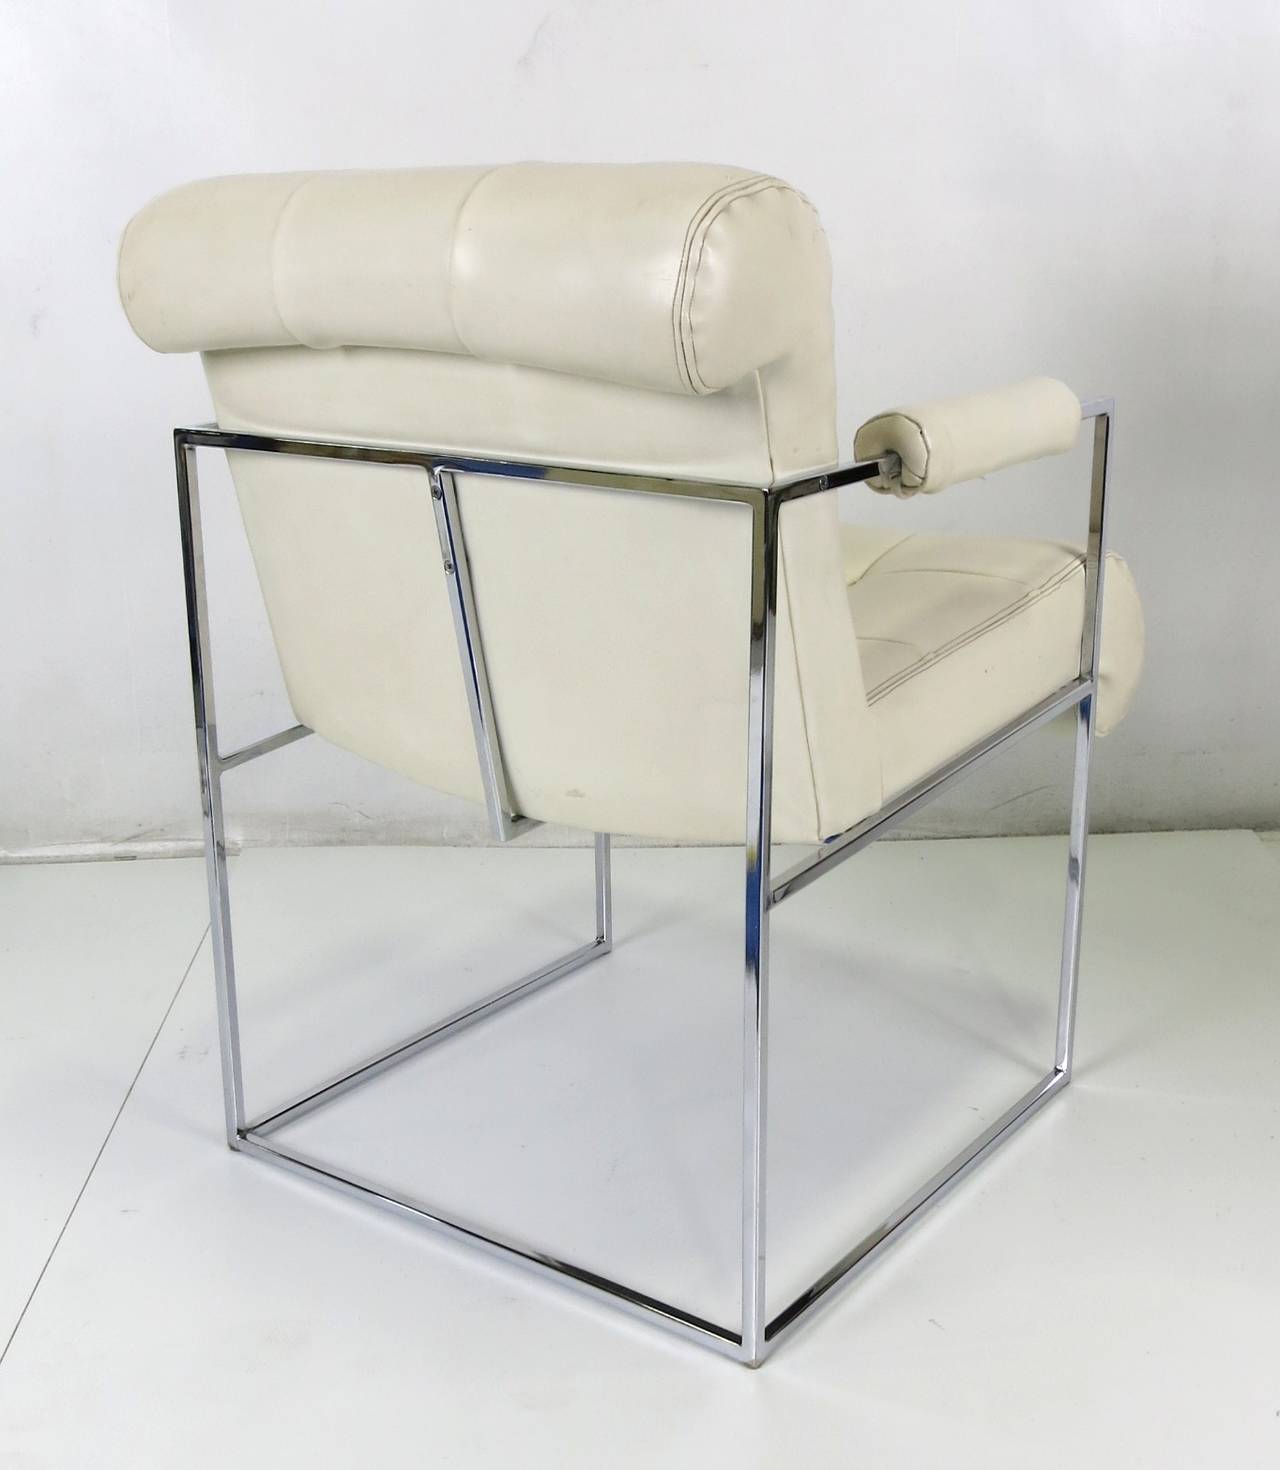 American Pair of Chrome Thin Line Lounge Chairs by Milo Baughman